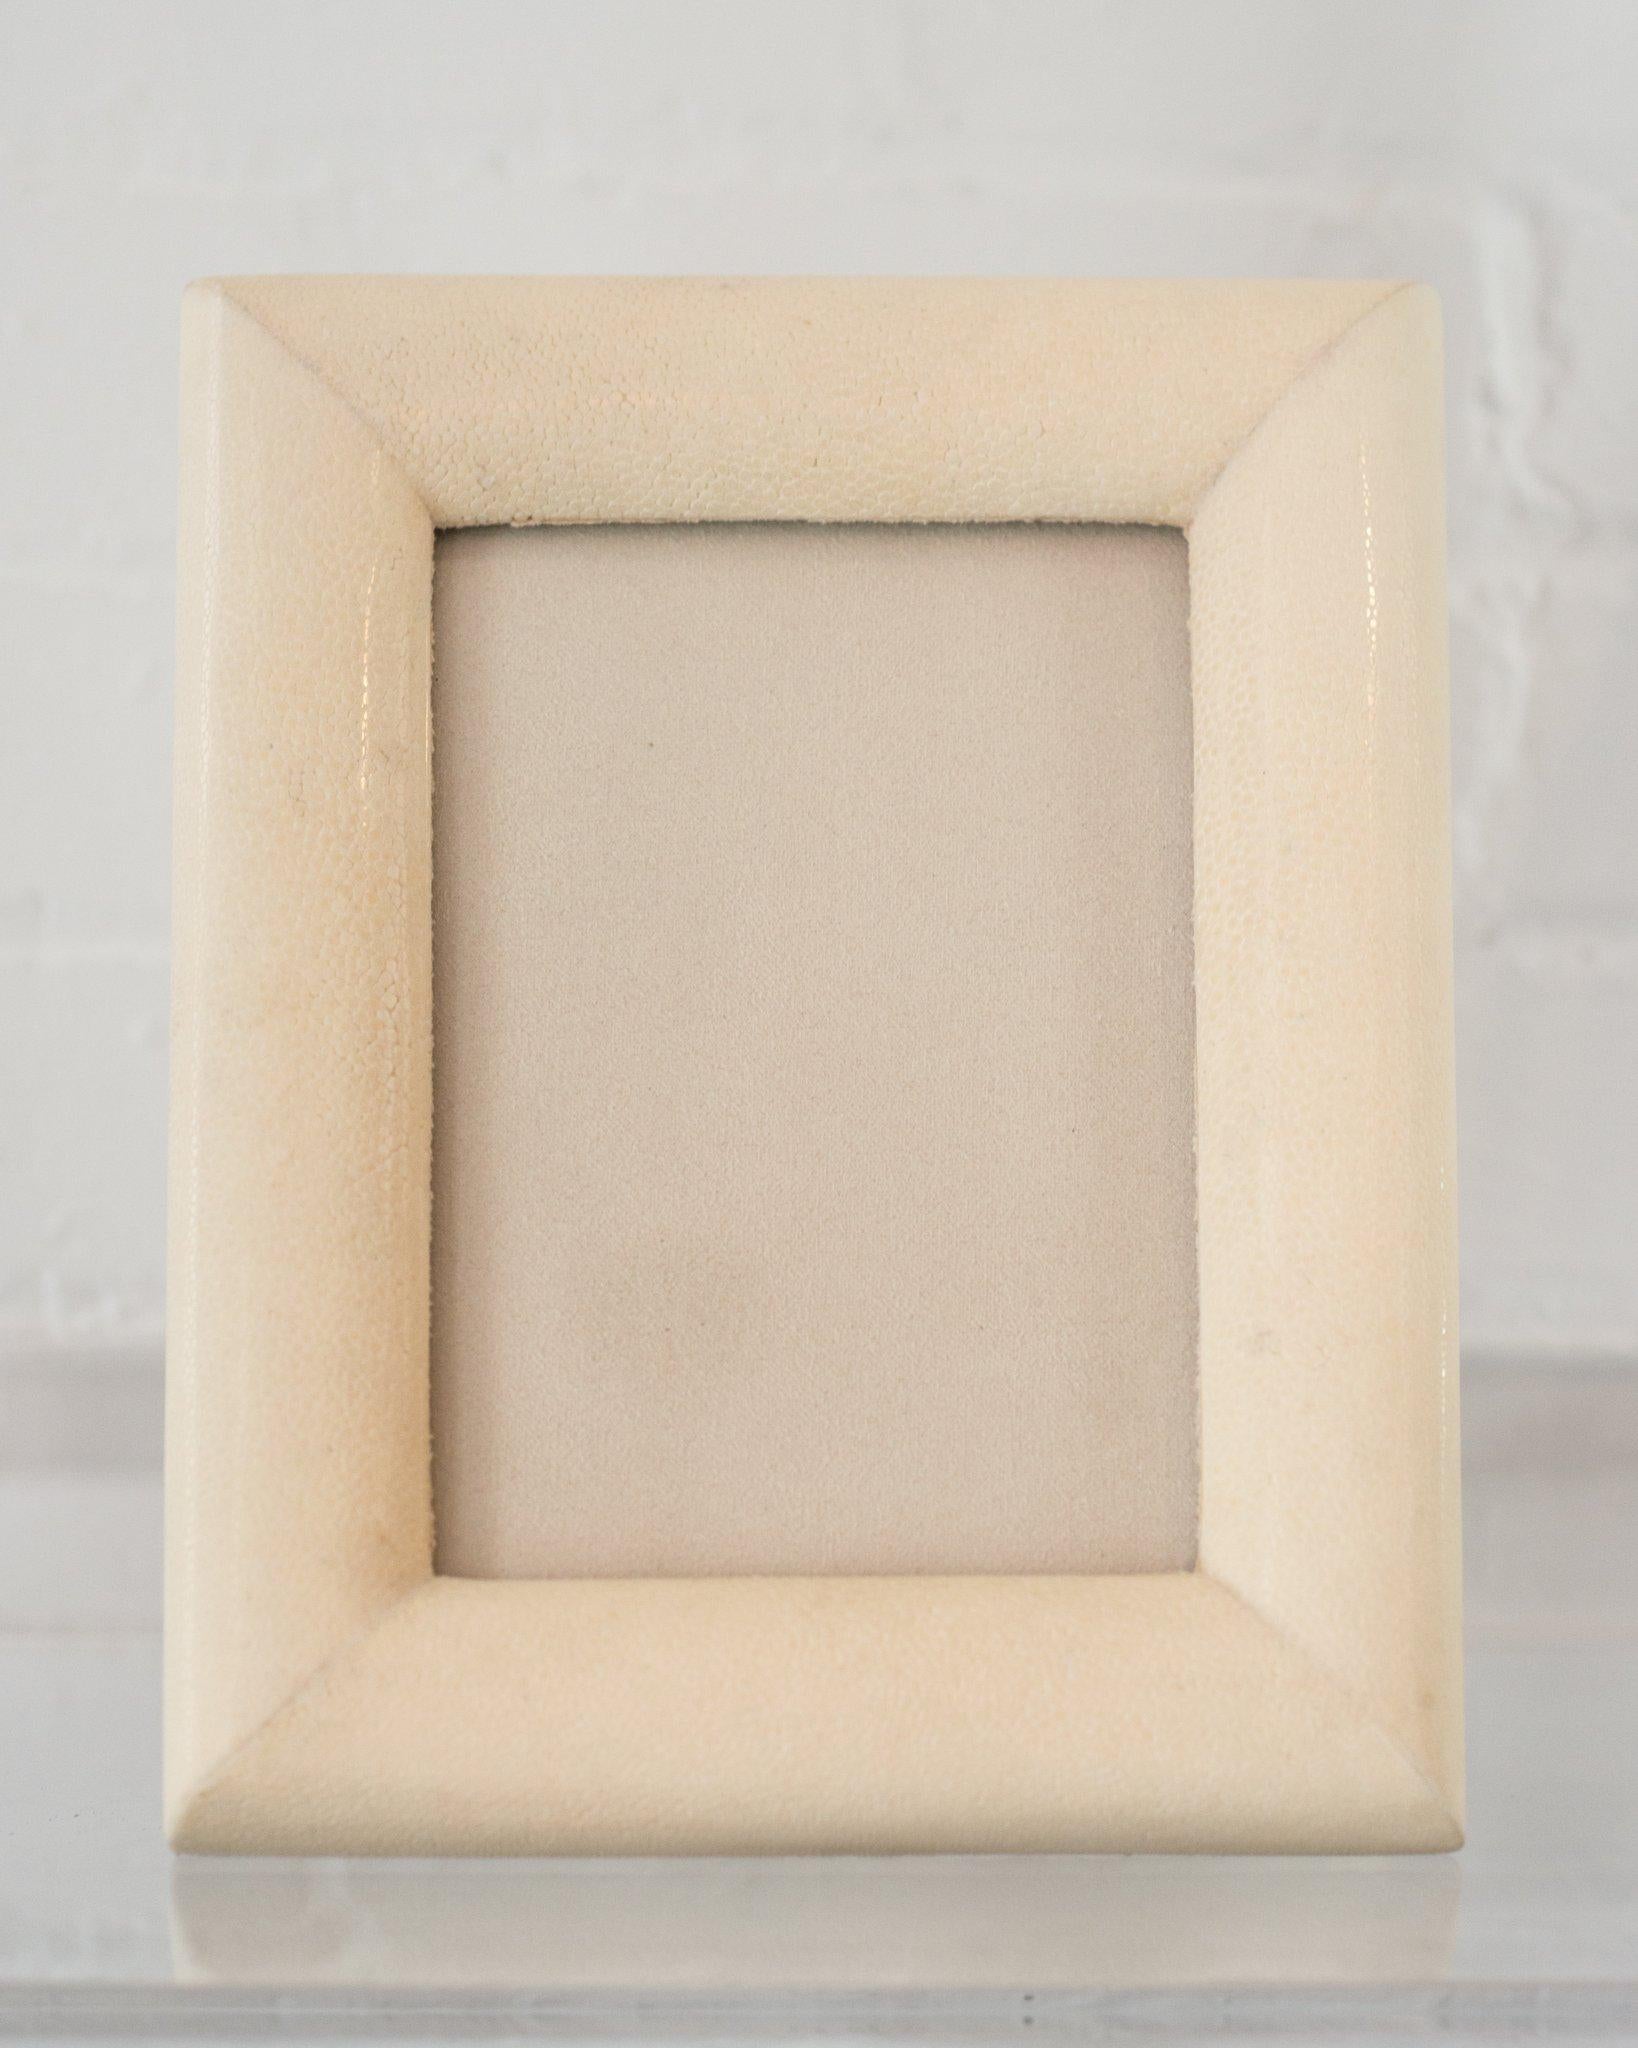 A medium picture frame in cream shagreen leather and walnut, backed in suede. Accommodates one 5 x 7